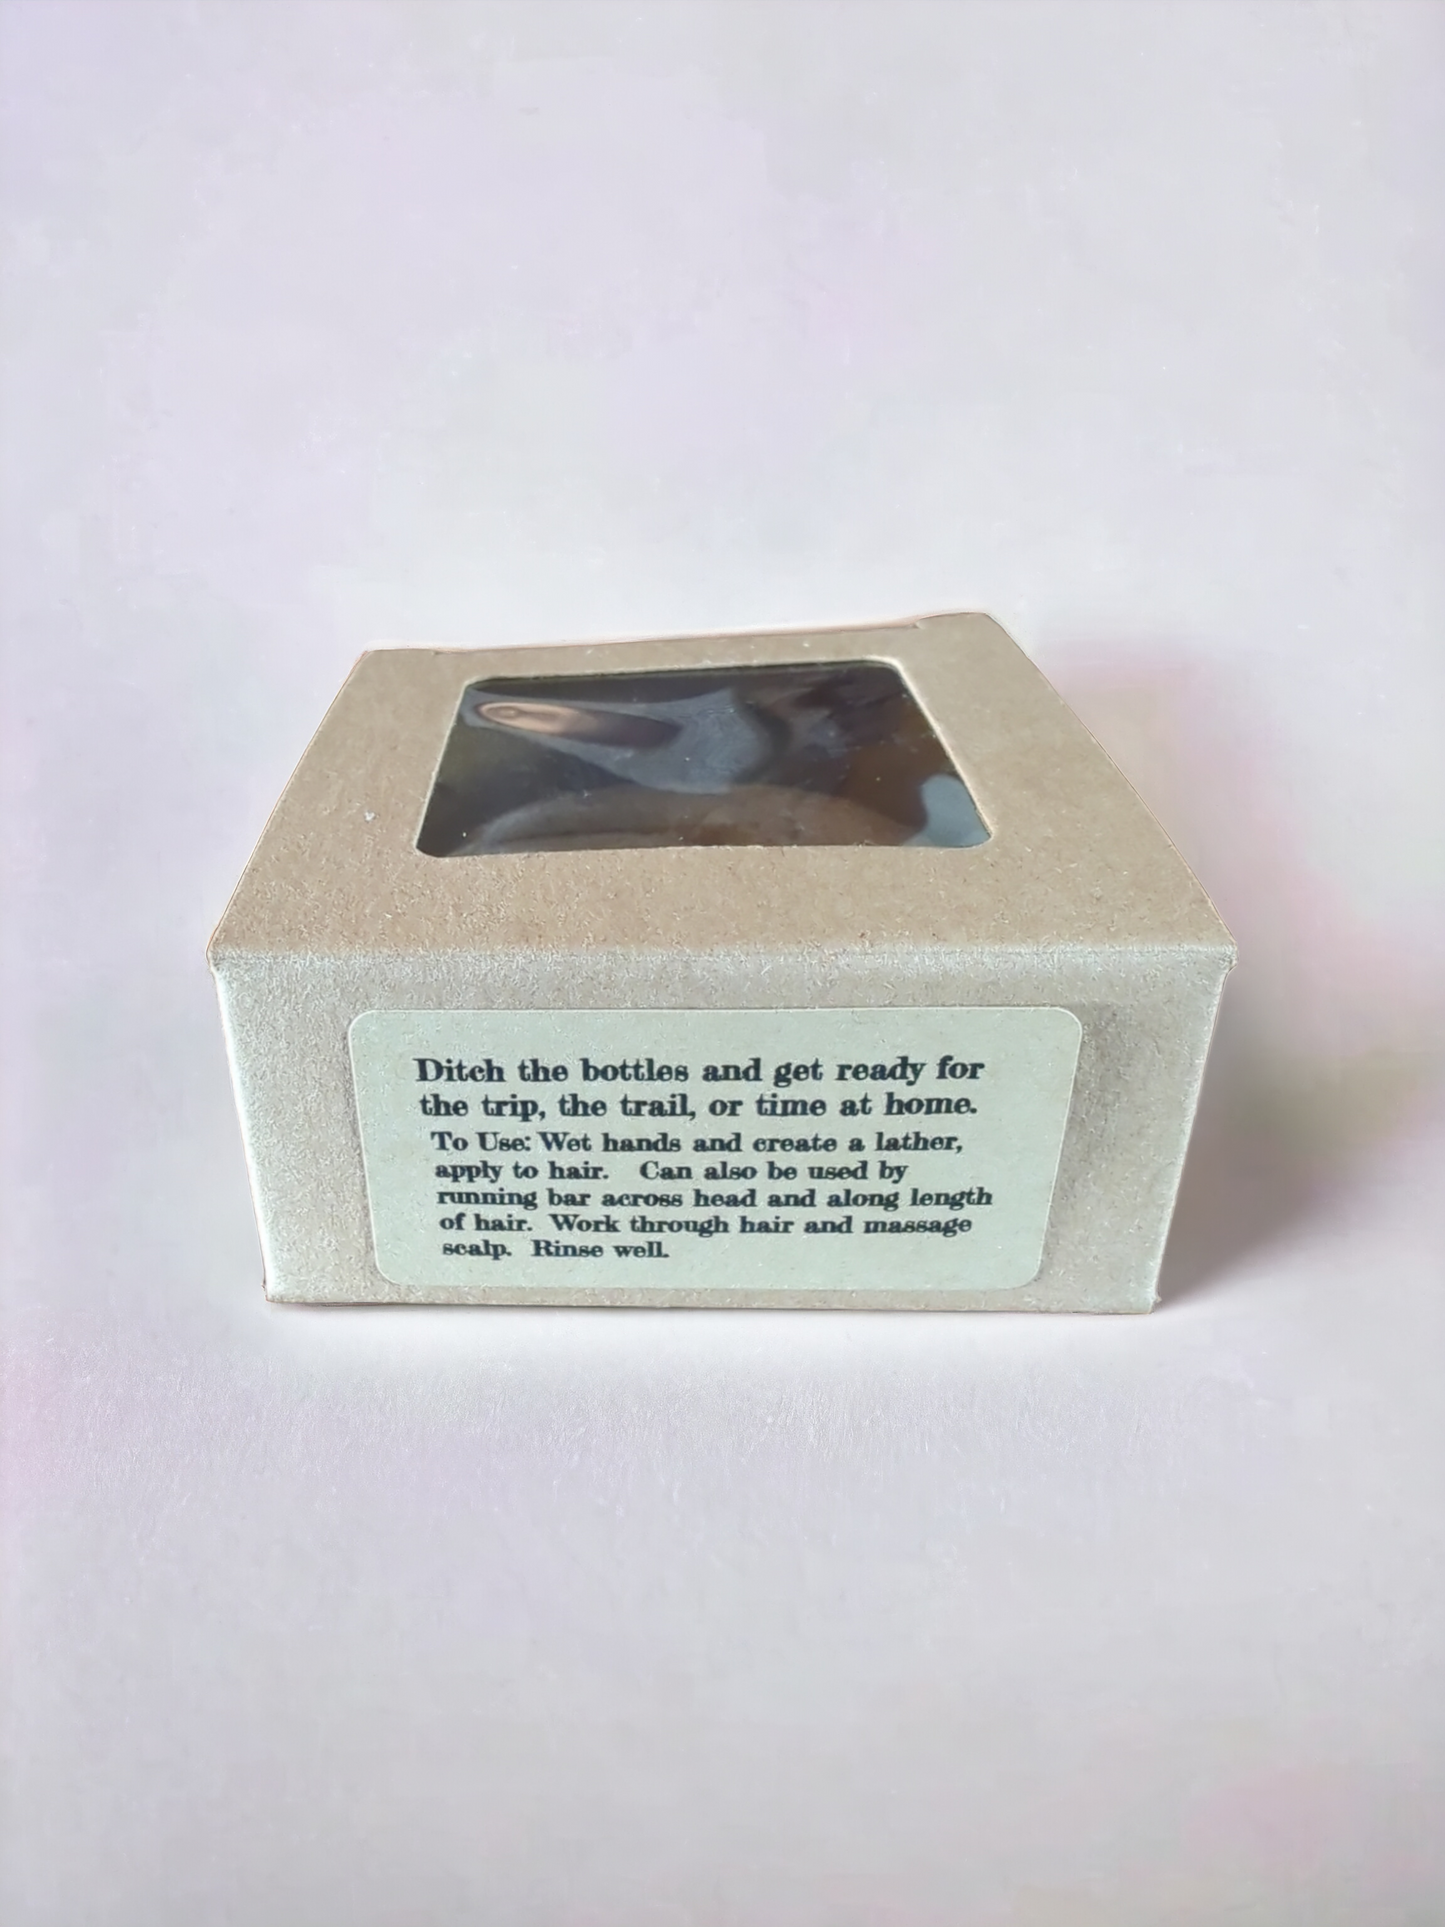 Nomad shampoo bar back label and how to use, Apothecuryous